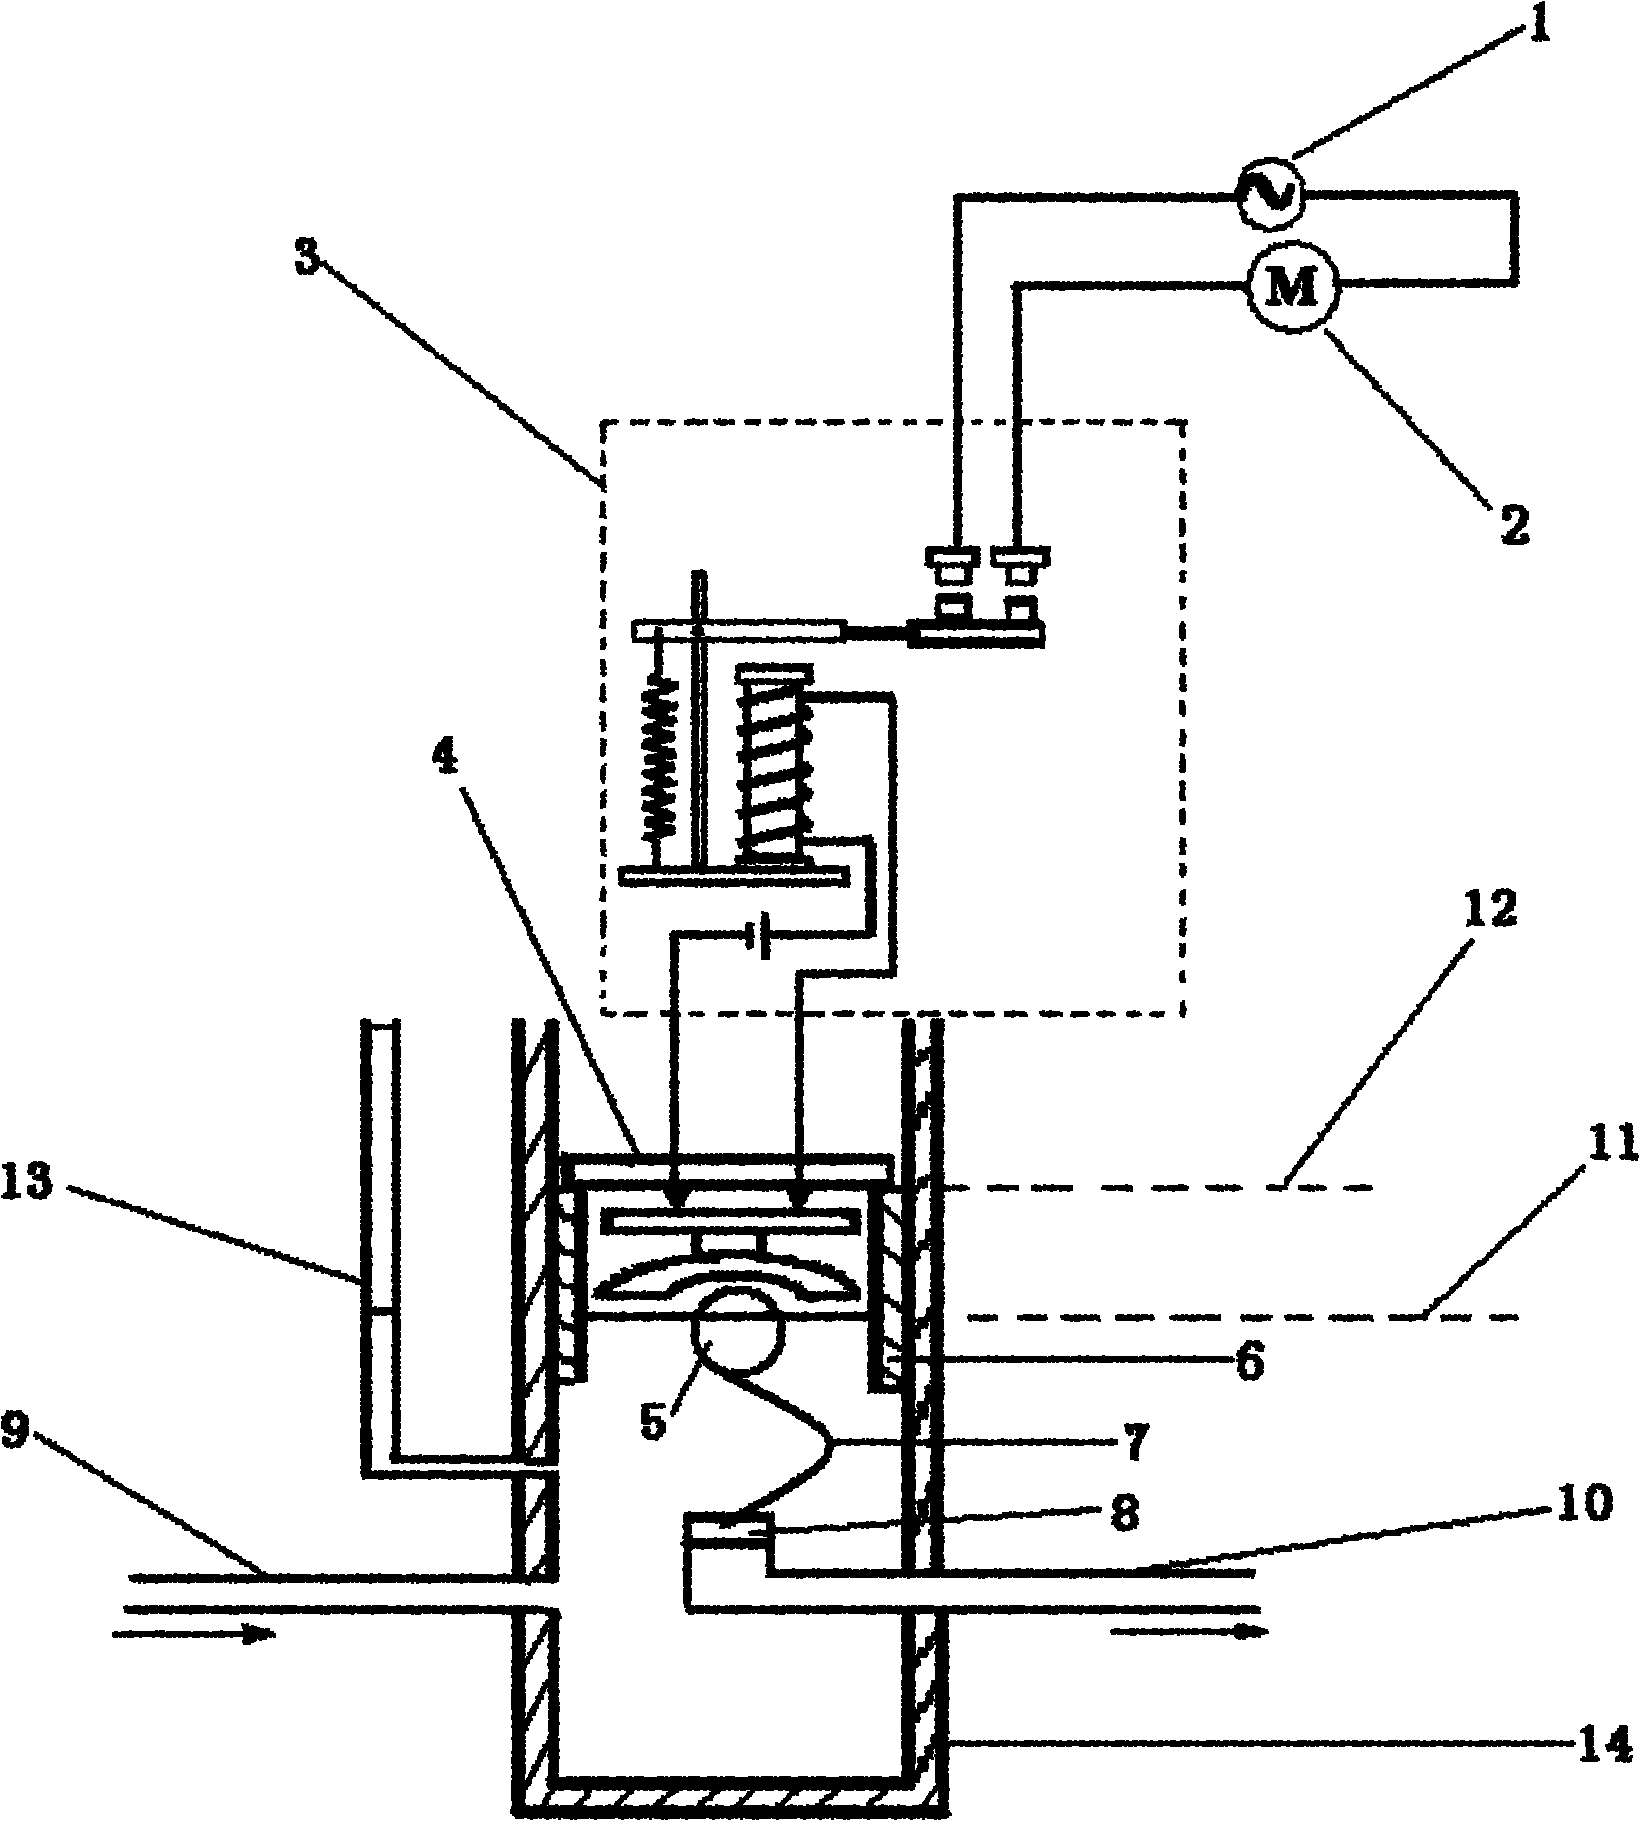 Device for automatically controlling irrigation and water draining of paddy field